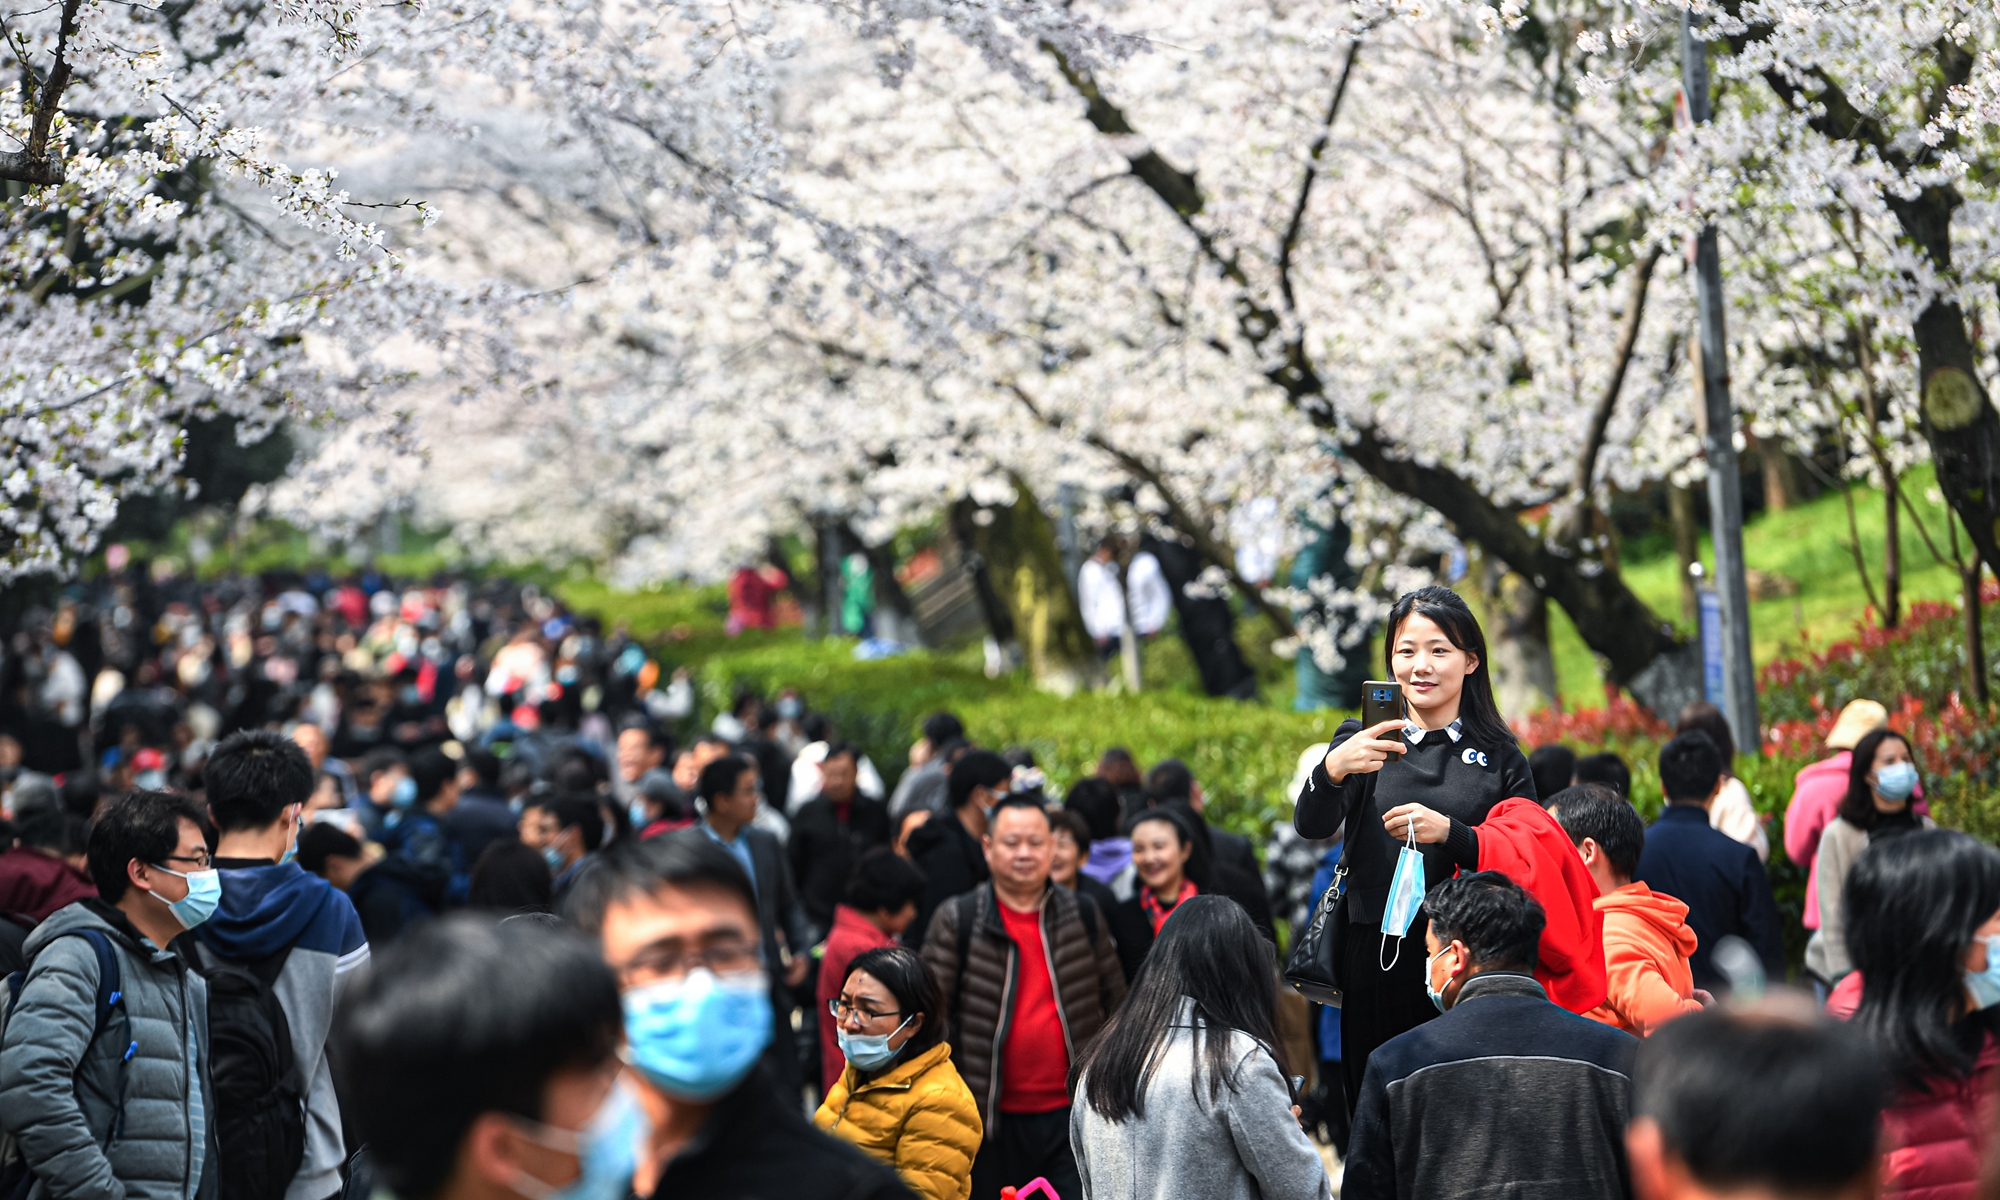 Medical workers who helped fight the COVID-19 in Wuhan last year and their families enjoy themselves on the cherry road in Wuhan University. The university is one of the best places in China to enjoy the flowers. Photo: VCG